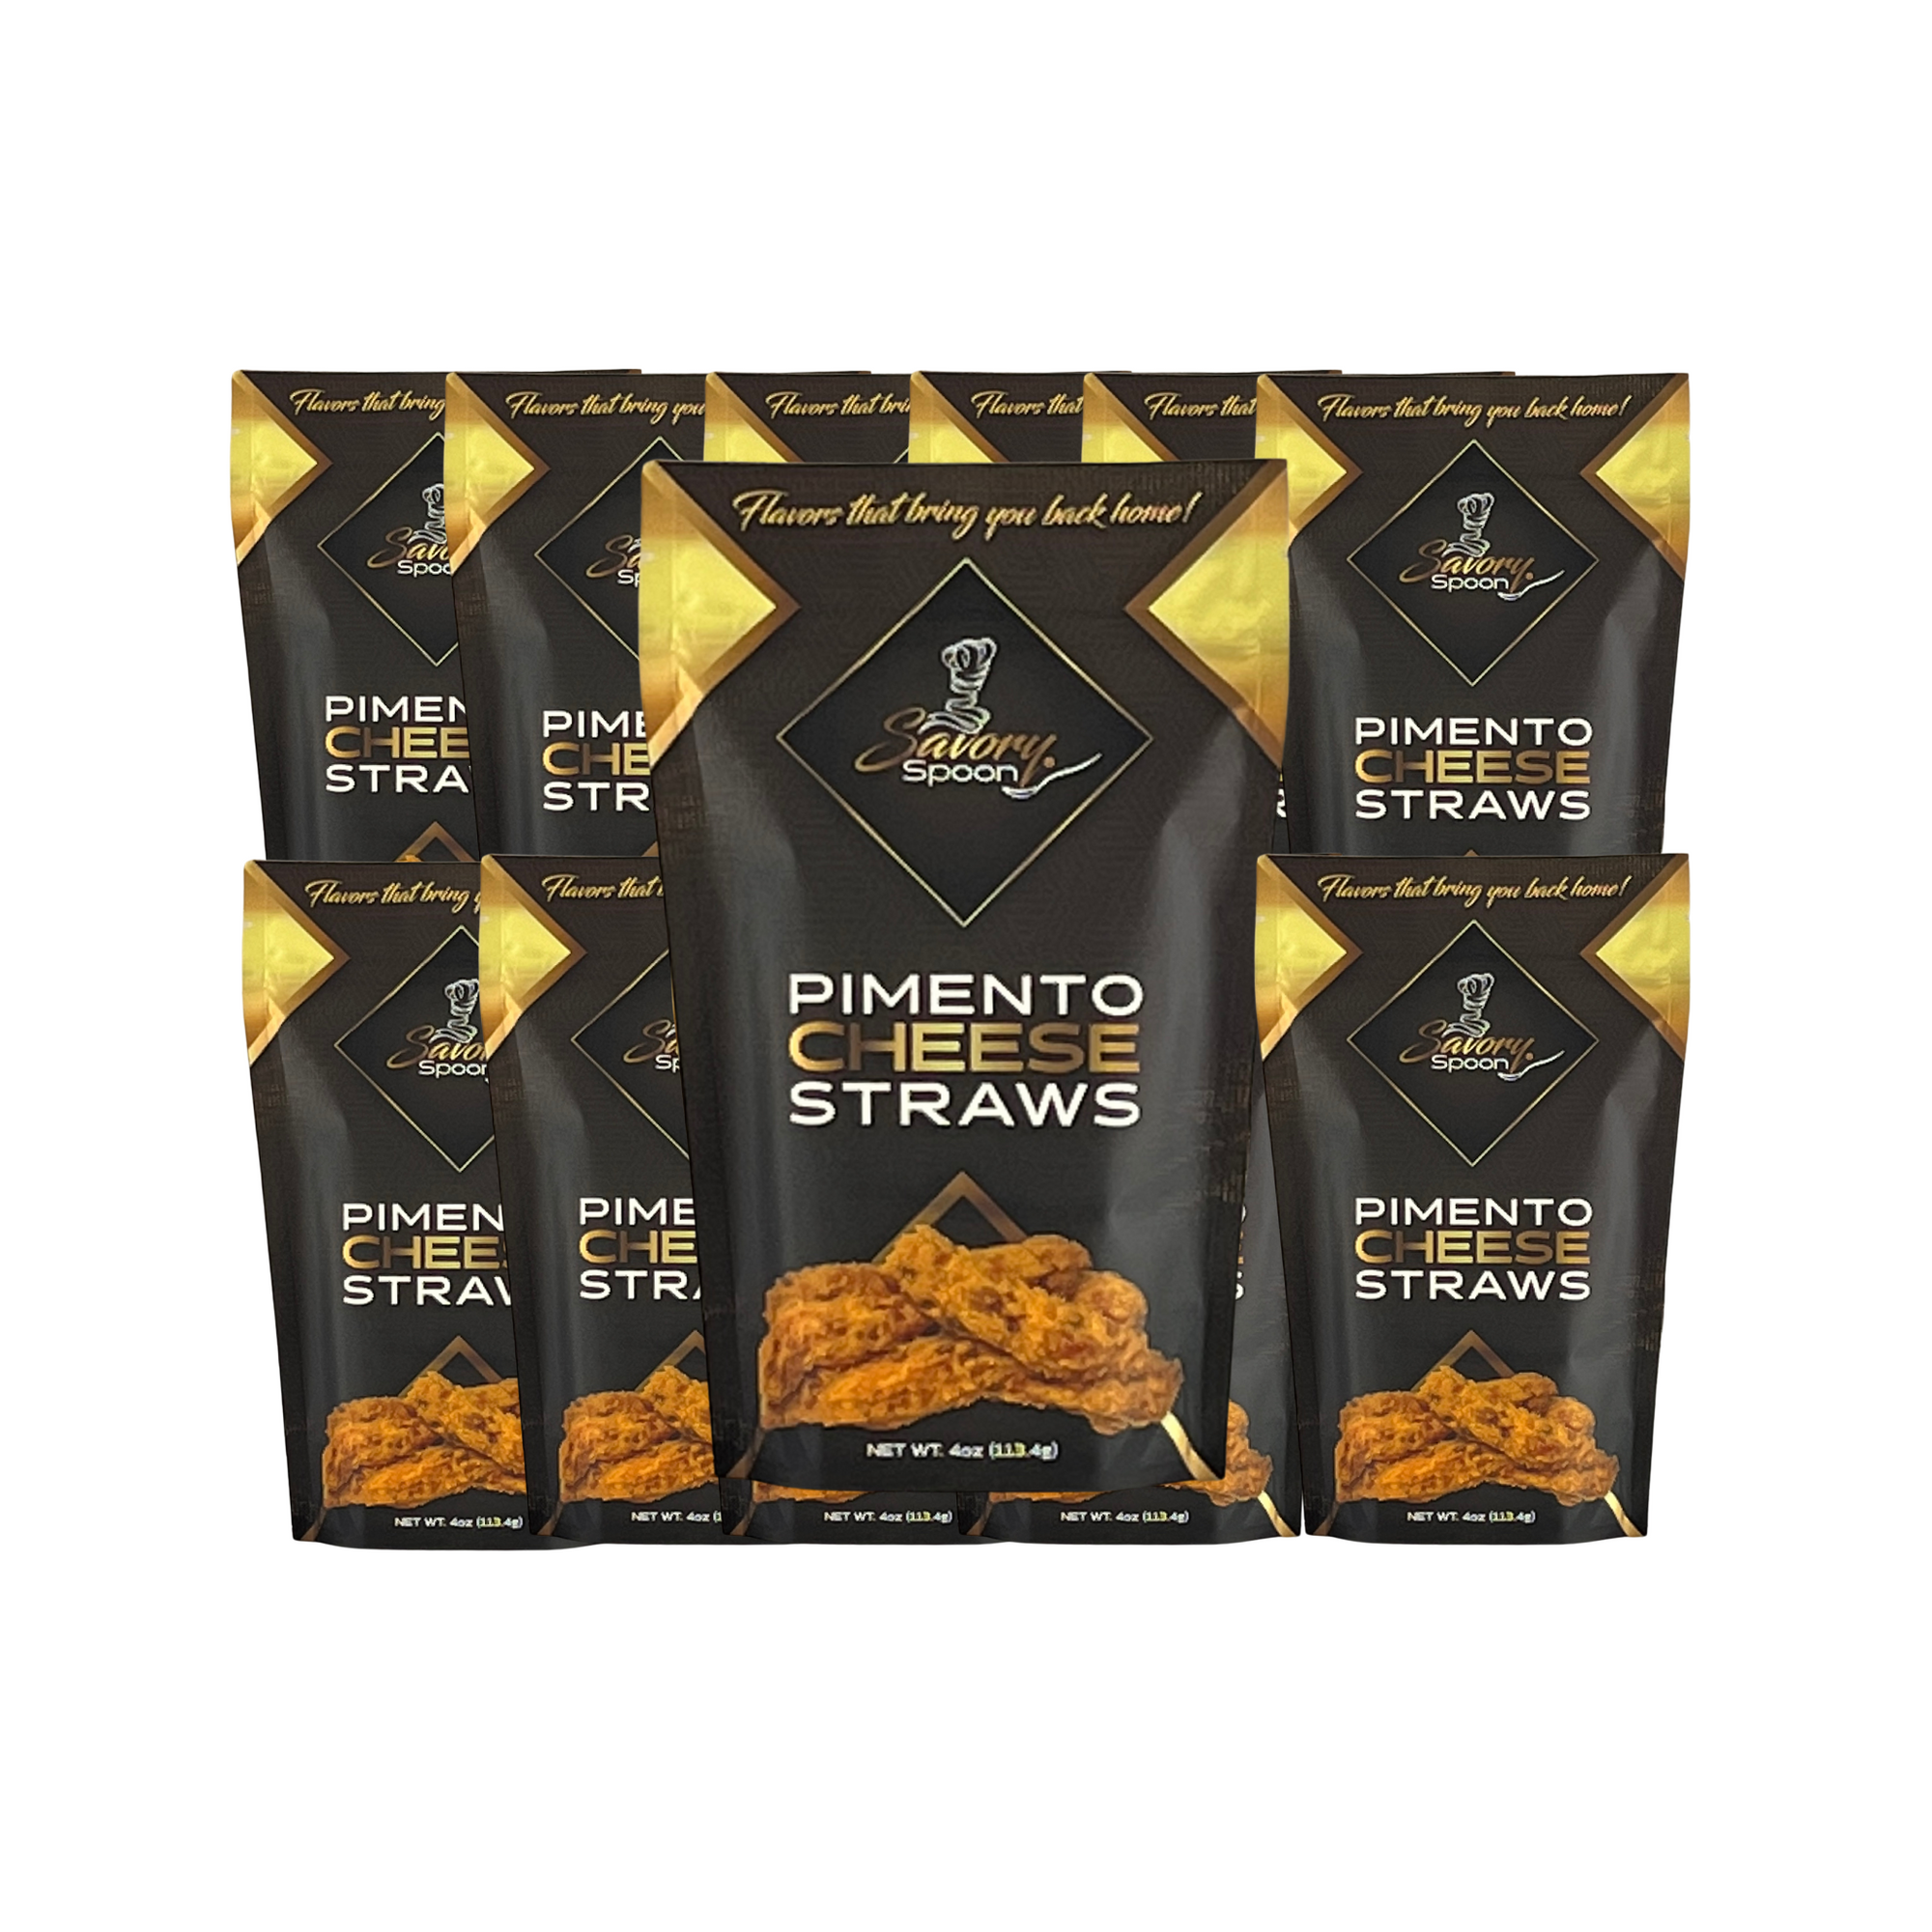 Pimento Cheese Straws - 12 Bags + Free Shipping